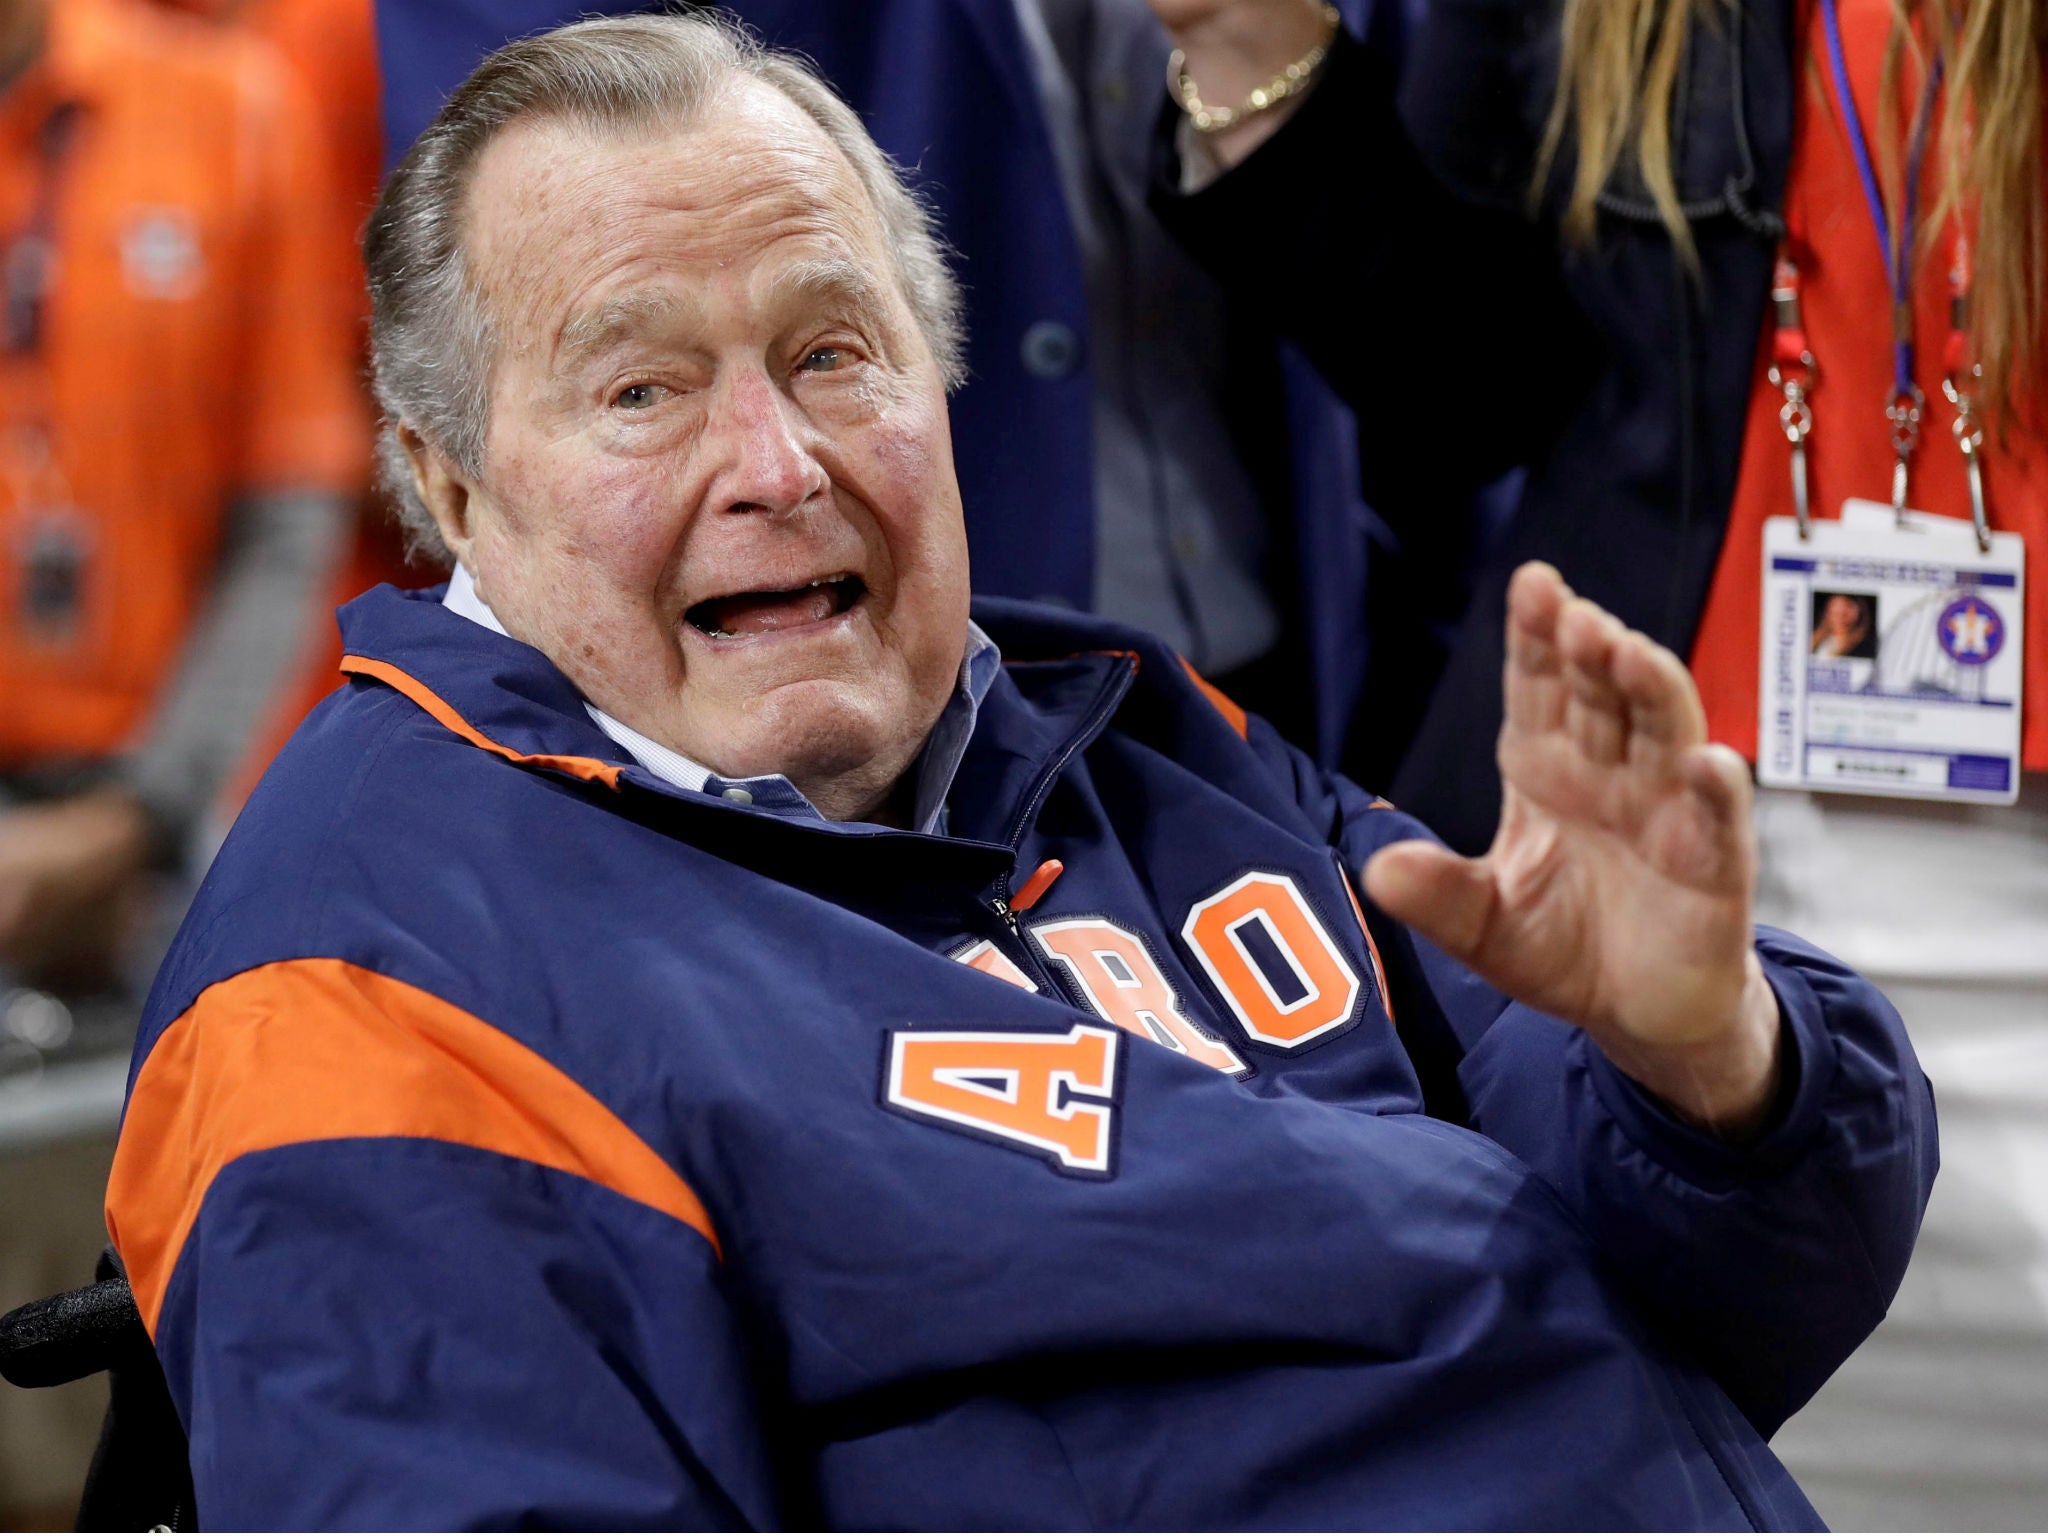 Former President George HW Bush, seen here during the World Series in Houston, Texas on October 29, 2017, has been accused of groping several women